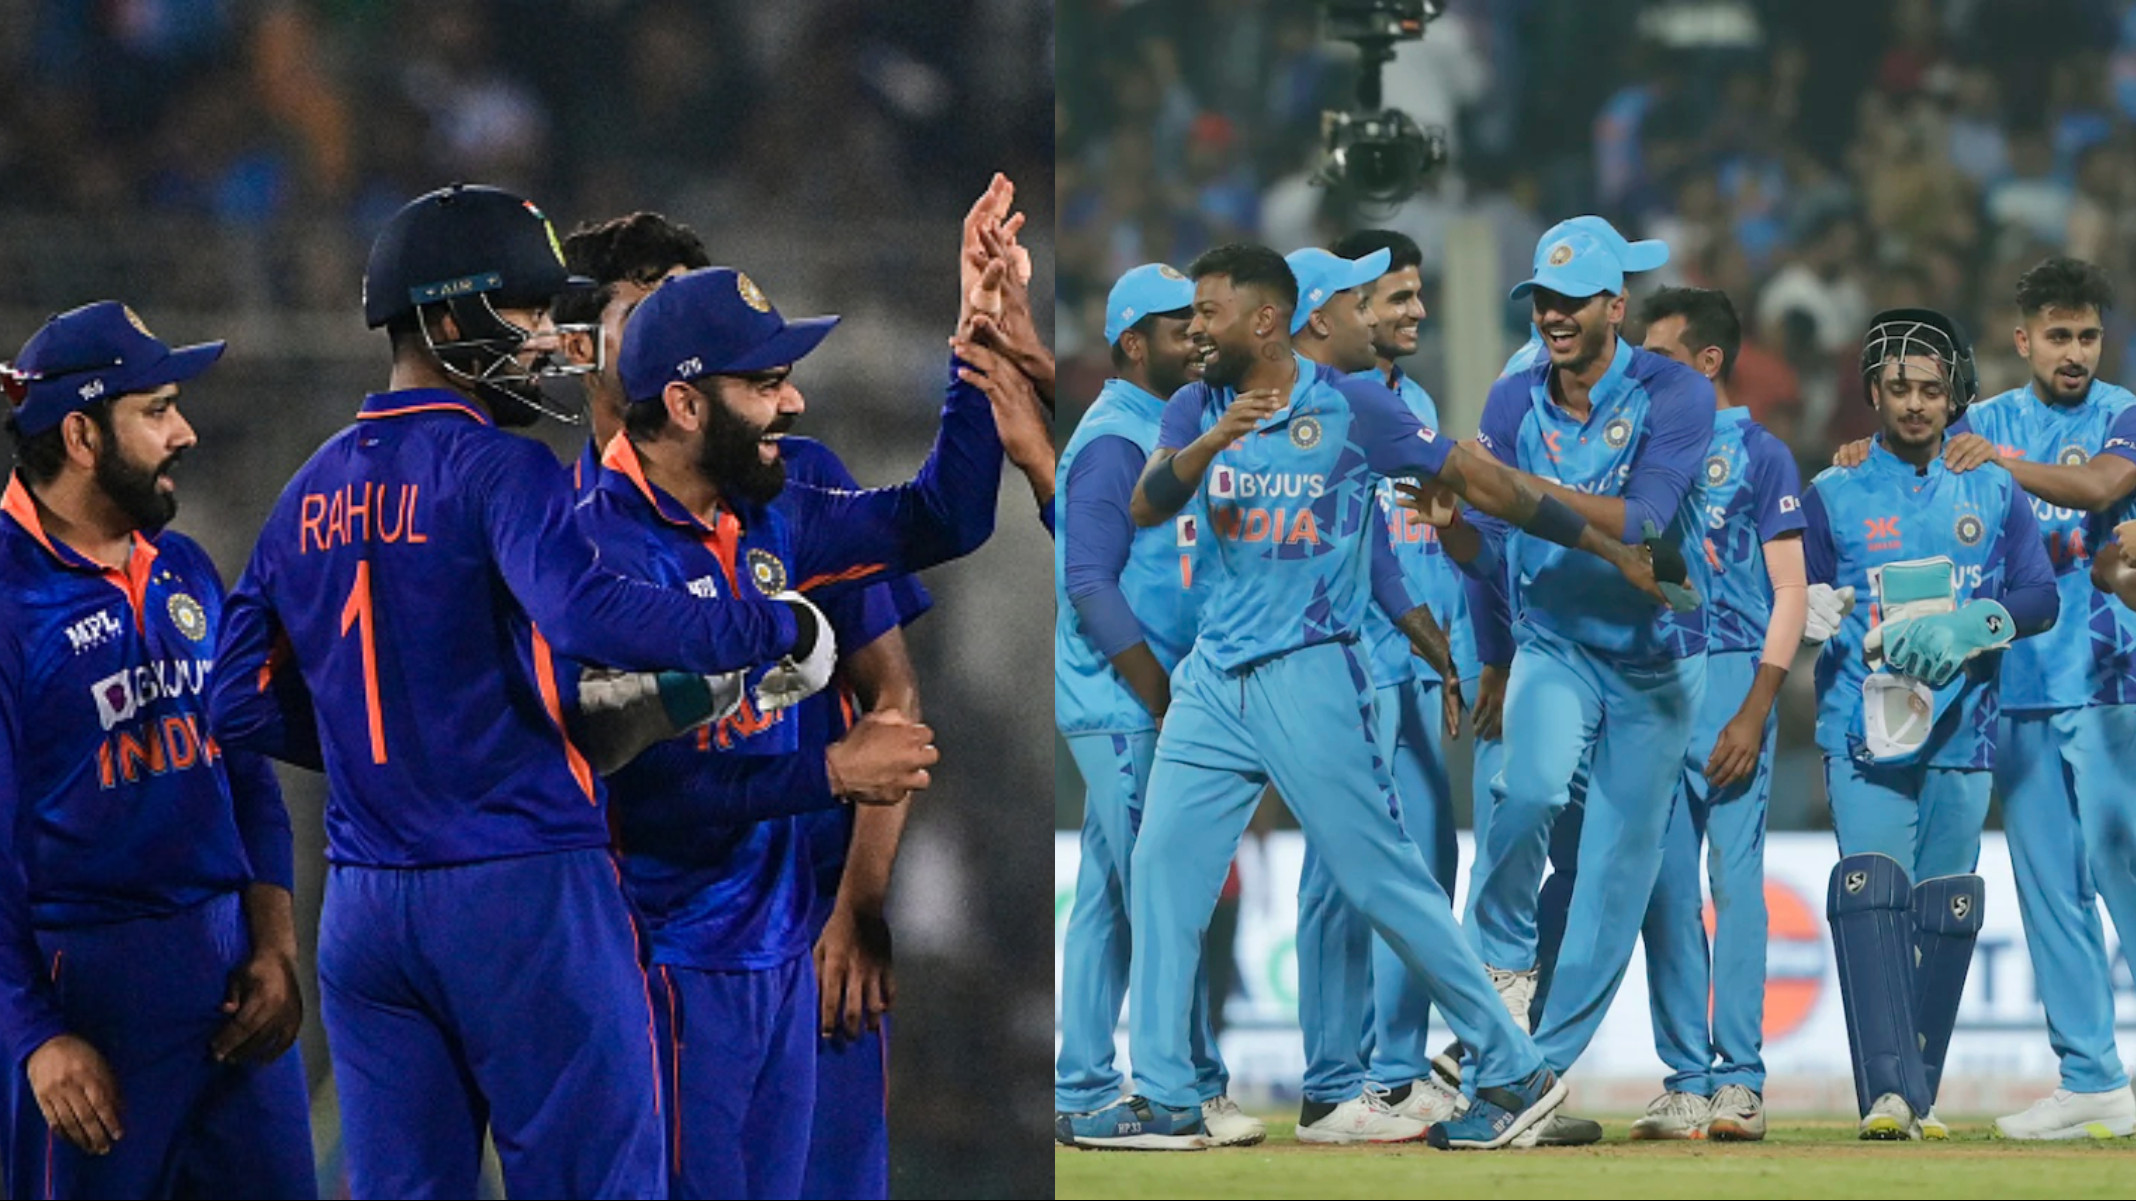 IND v NZ 2023: BCCI announces India squads for New Zealand T20I and ODI series